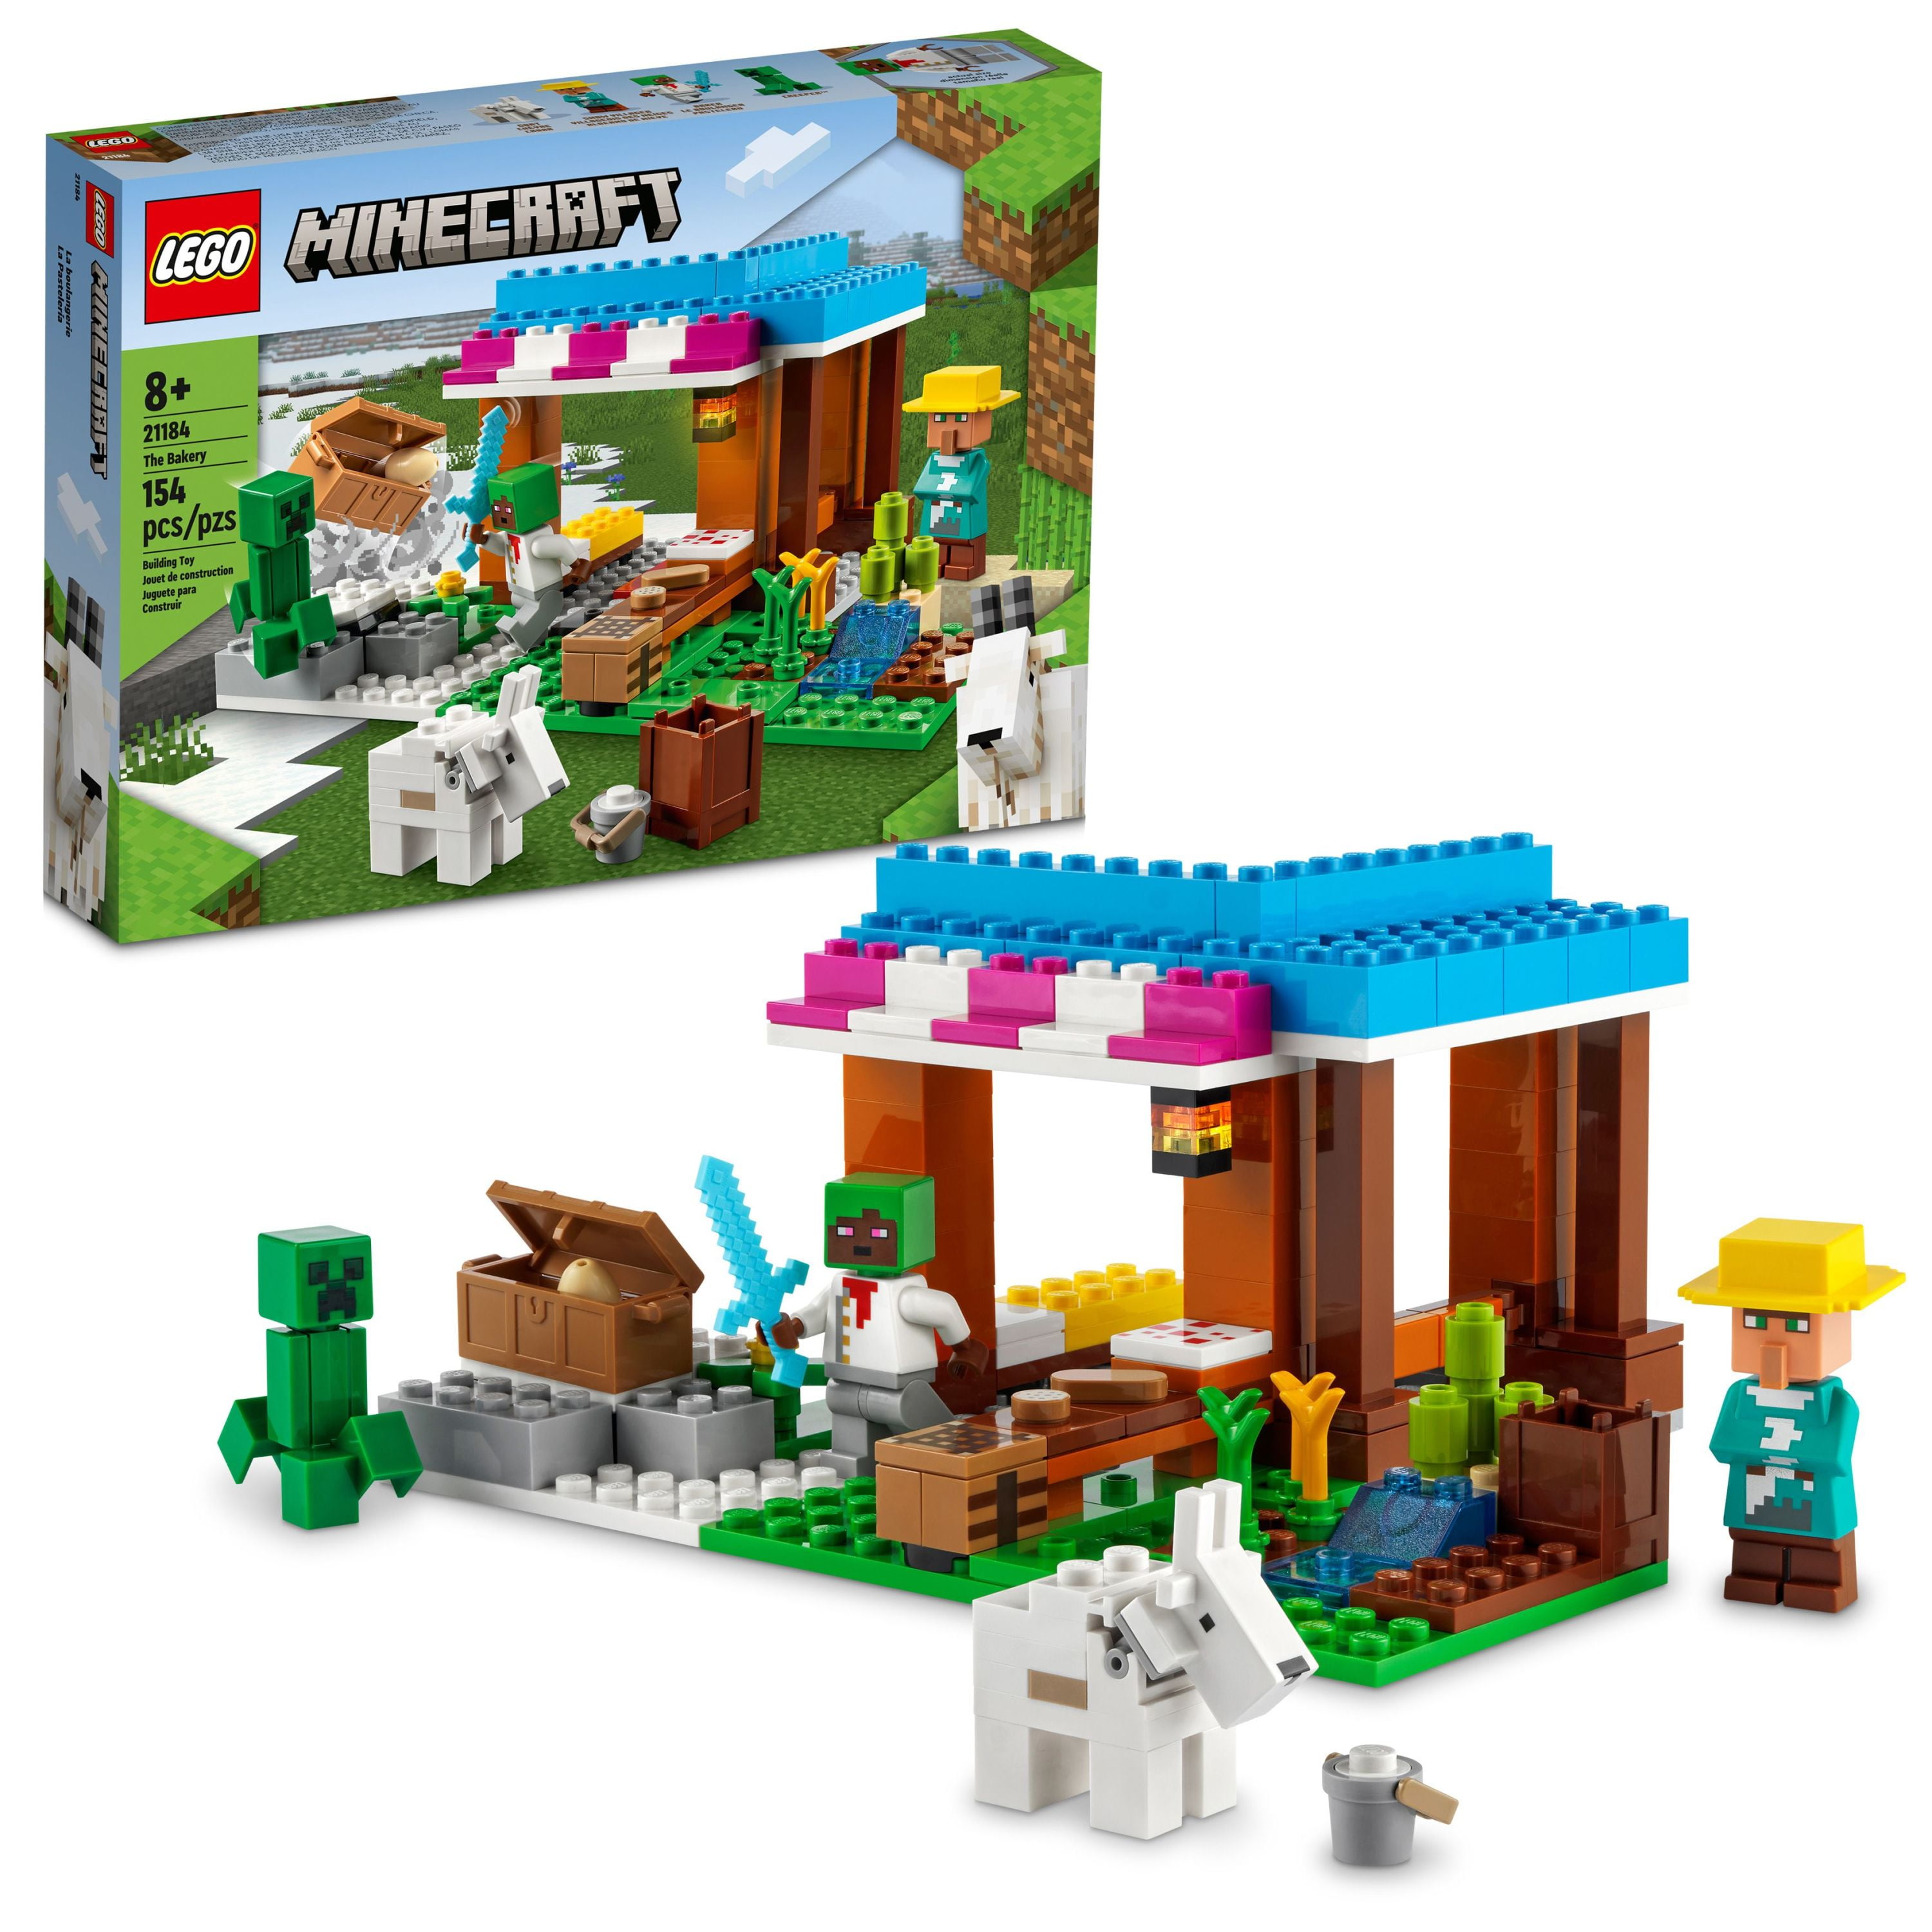 LEGO Minecraft The Bakery 21184 Building Toy Set for Kids, Featuring 3 Figures and a Goat, Game Inspired Play with Village and Chest Accessories, Great Gift for Girls and